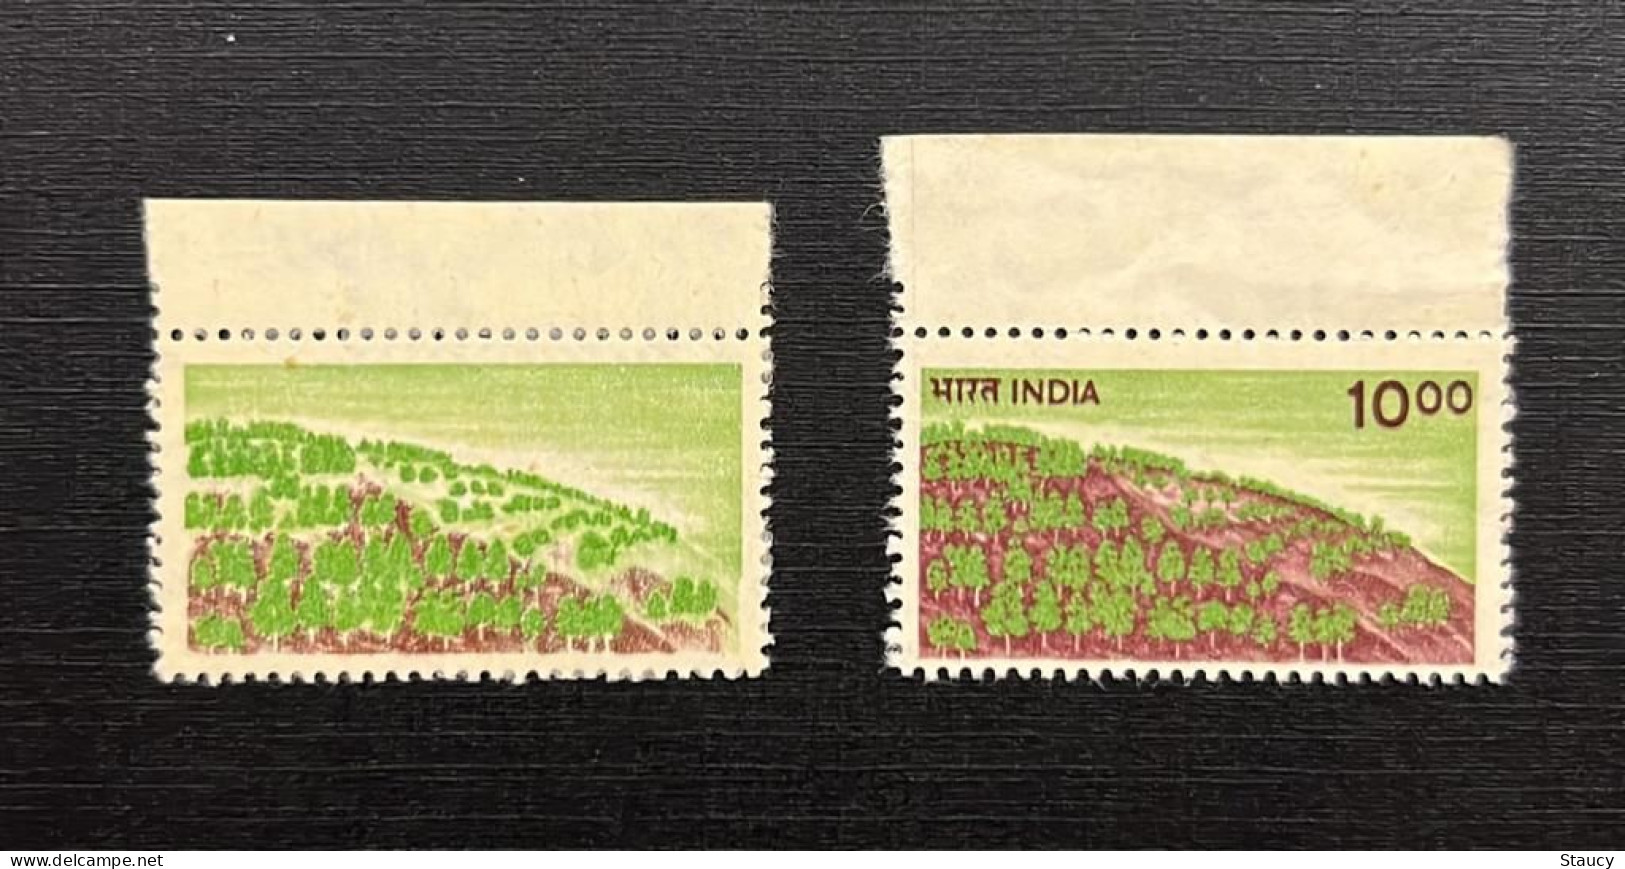 India 1988 Error 6th Definitive Series, Rs.10  Afforestation / Tree Error "partly BROWN COLOUR OMMITTED" MNH As Per Scan - Erreurs Sur Timbres